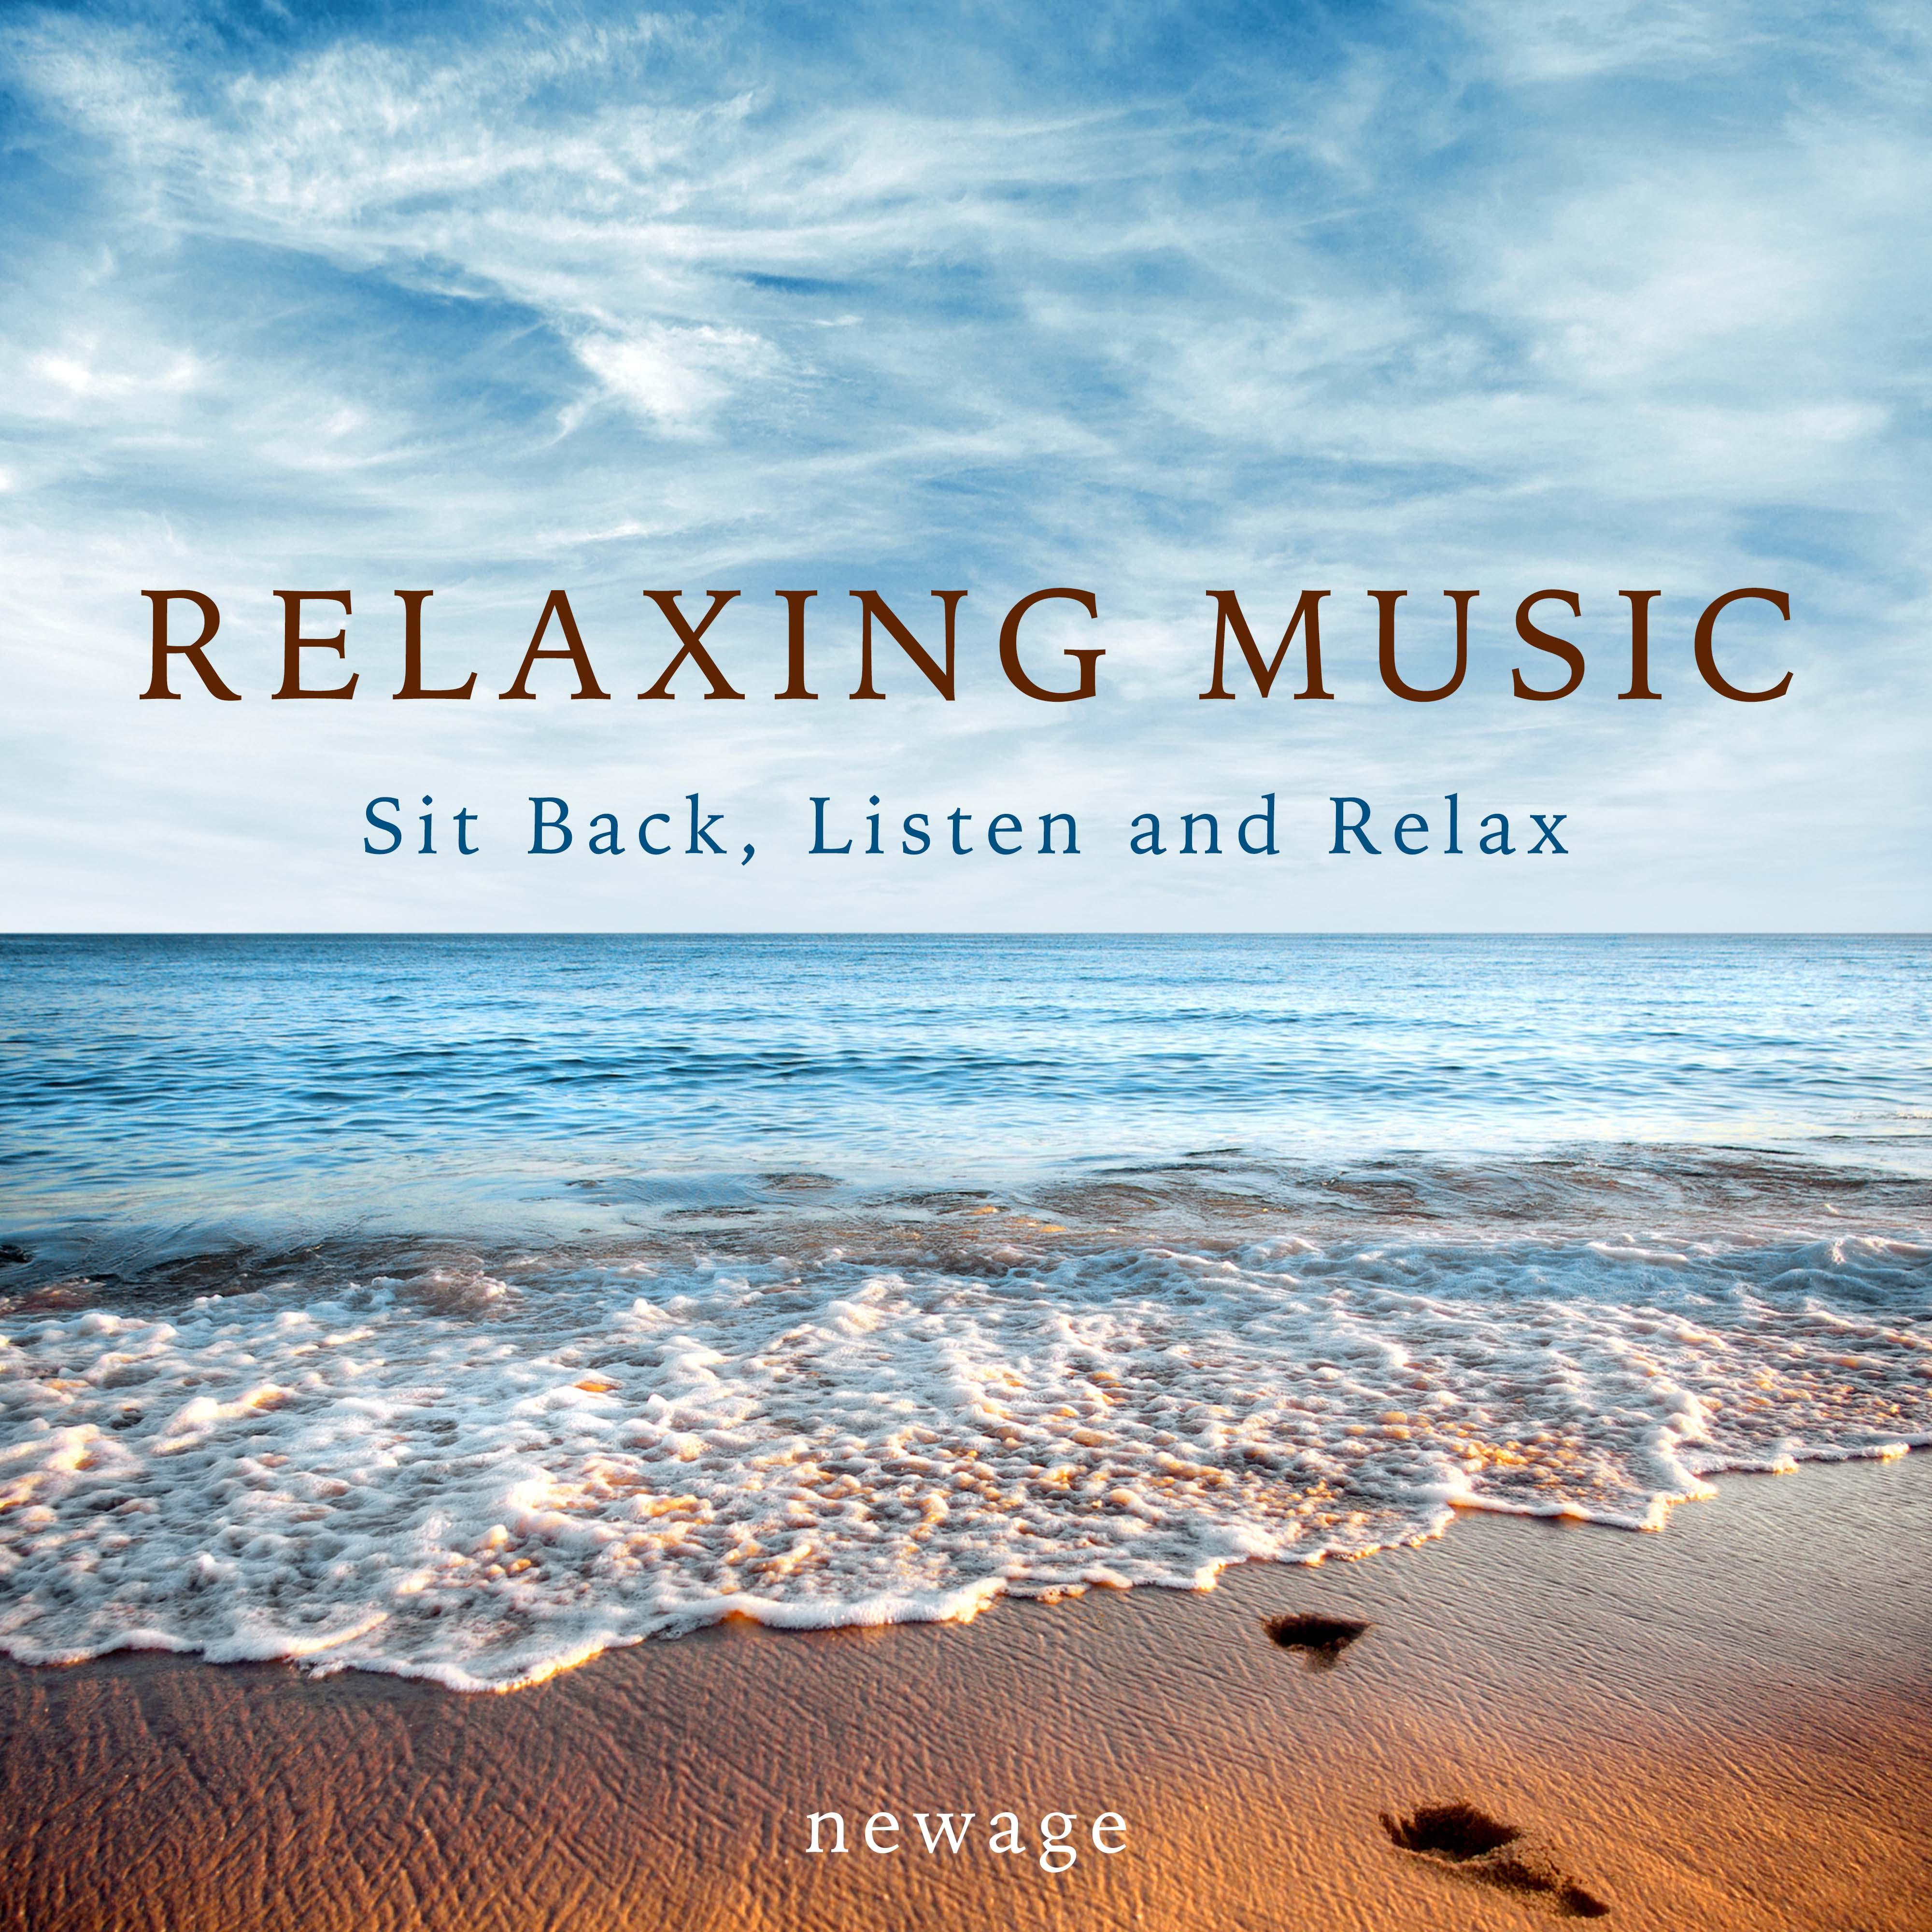 Relaxing Music: Sit Back, Listen and Relax